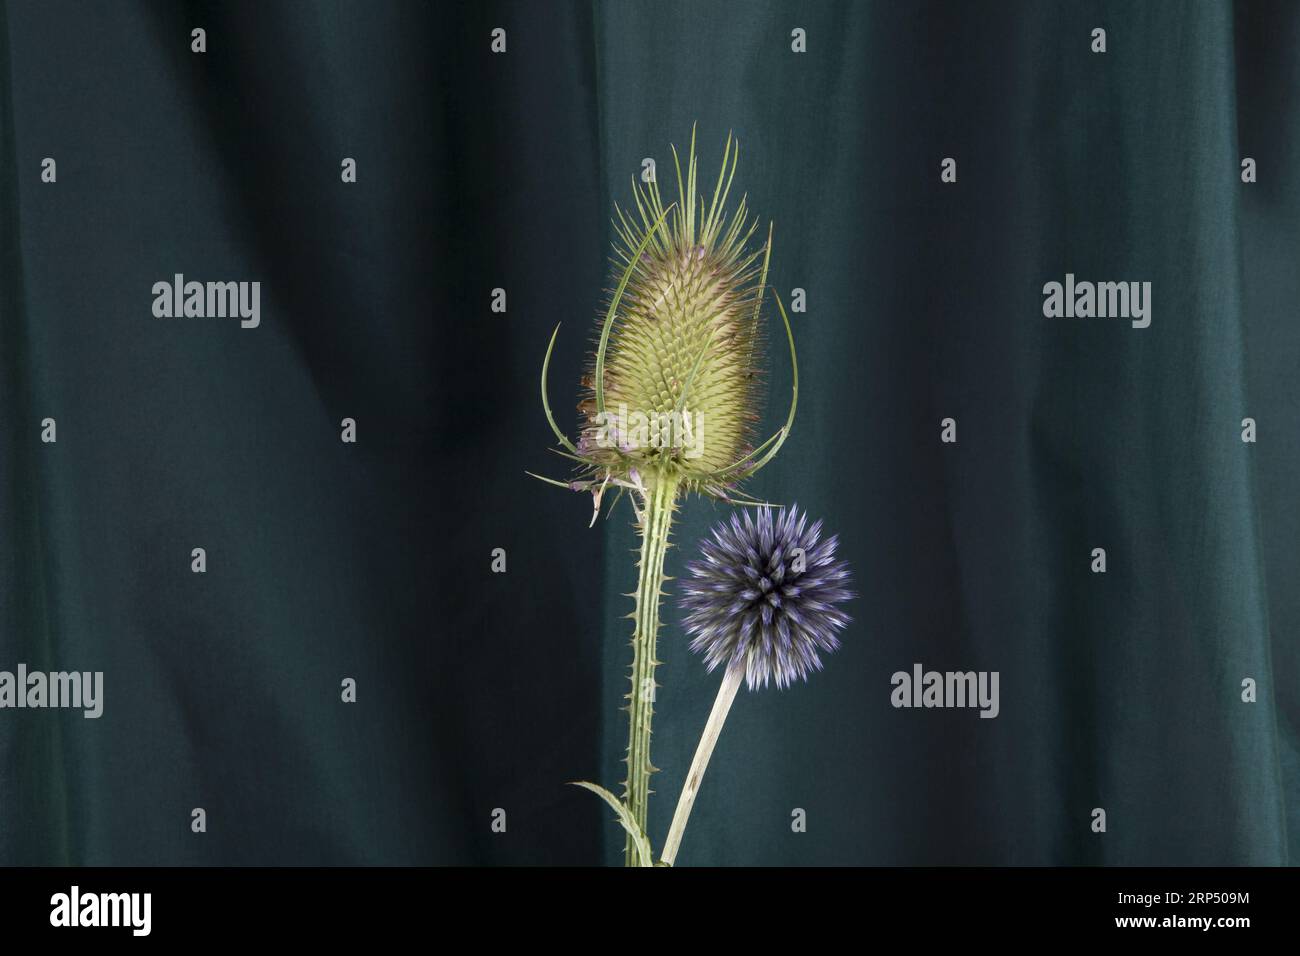 a couple of thistle stalk in front of a background of green curtains. Minimal color still life photography. Stock Photo